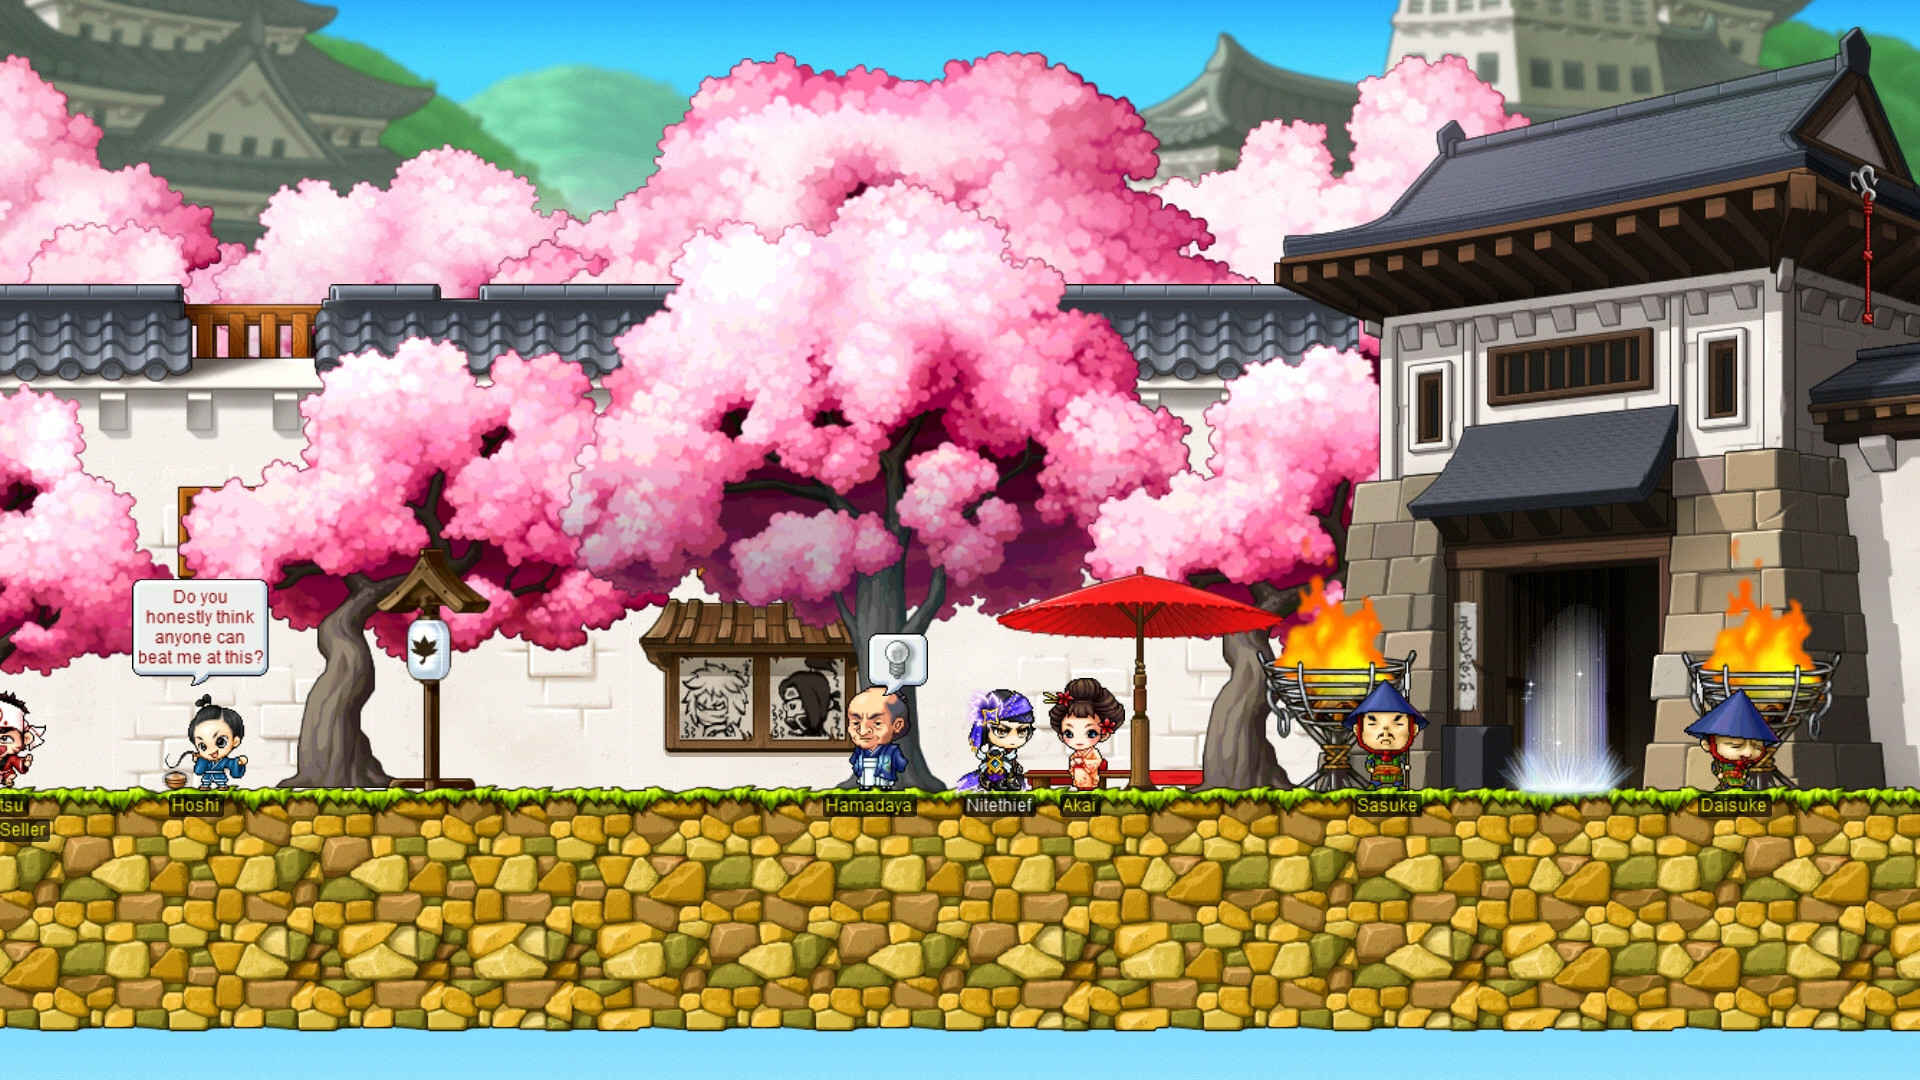 best free games: characters such as samurai and a geisha standing in front of a Japanese castle and pink cherry blossom trees in MapleStory